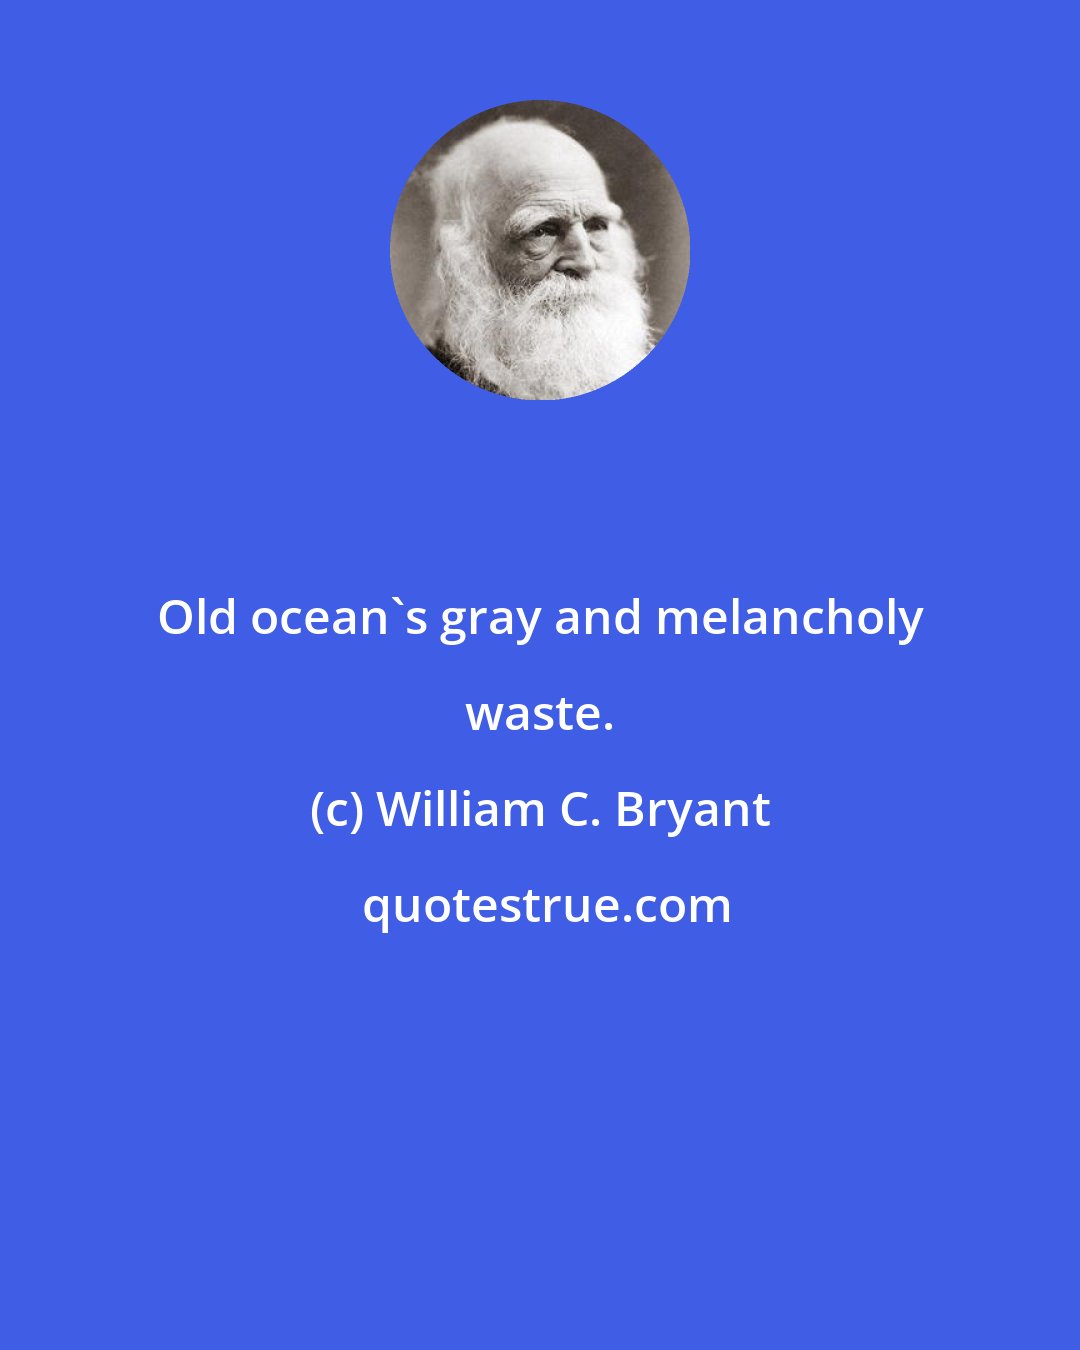 William C. Bryant: Old ocean's gray and melancholy waste.